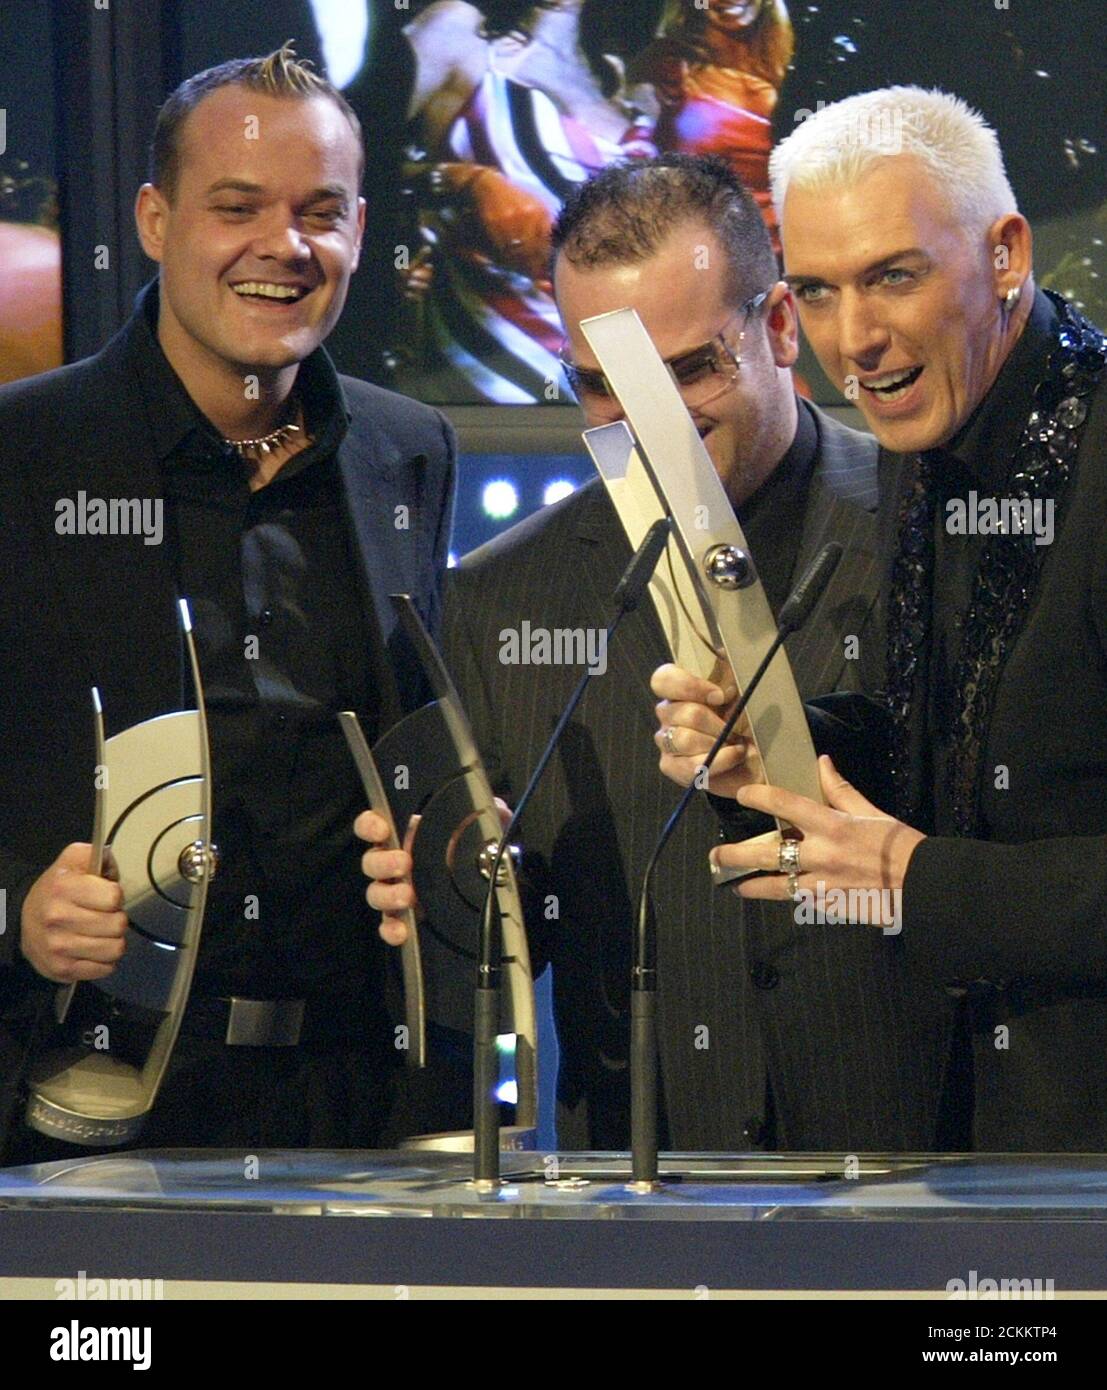 GERMAN SINGERS RICK J. JORDAN, AXEL COON AND H.P. BAXXTER OF 'SCOOTER'  ACCEPT THE ECHO MUSIC AWARDS IN BERLIN. German singers Rick J. Jordan  (L-R), Axel Coon and H.P. Baxxter of 'Scooter'